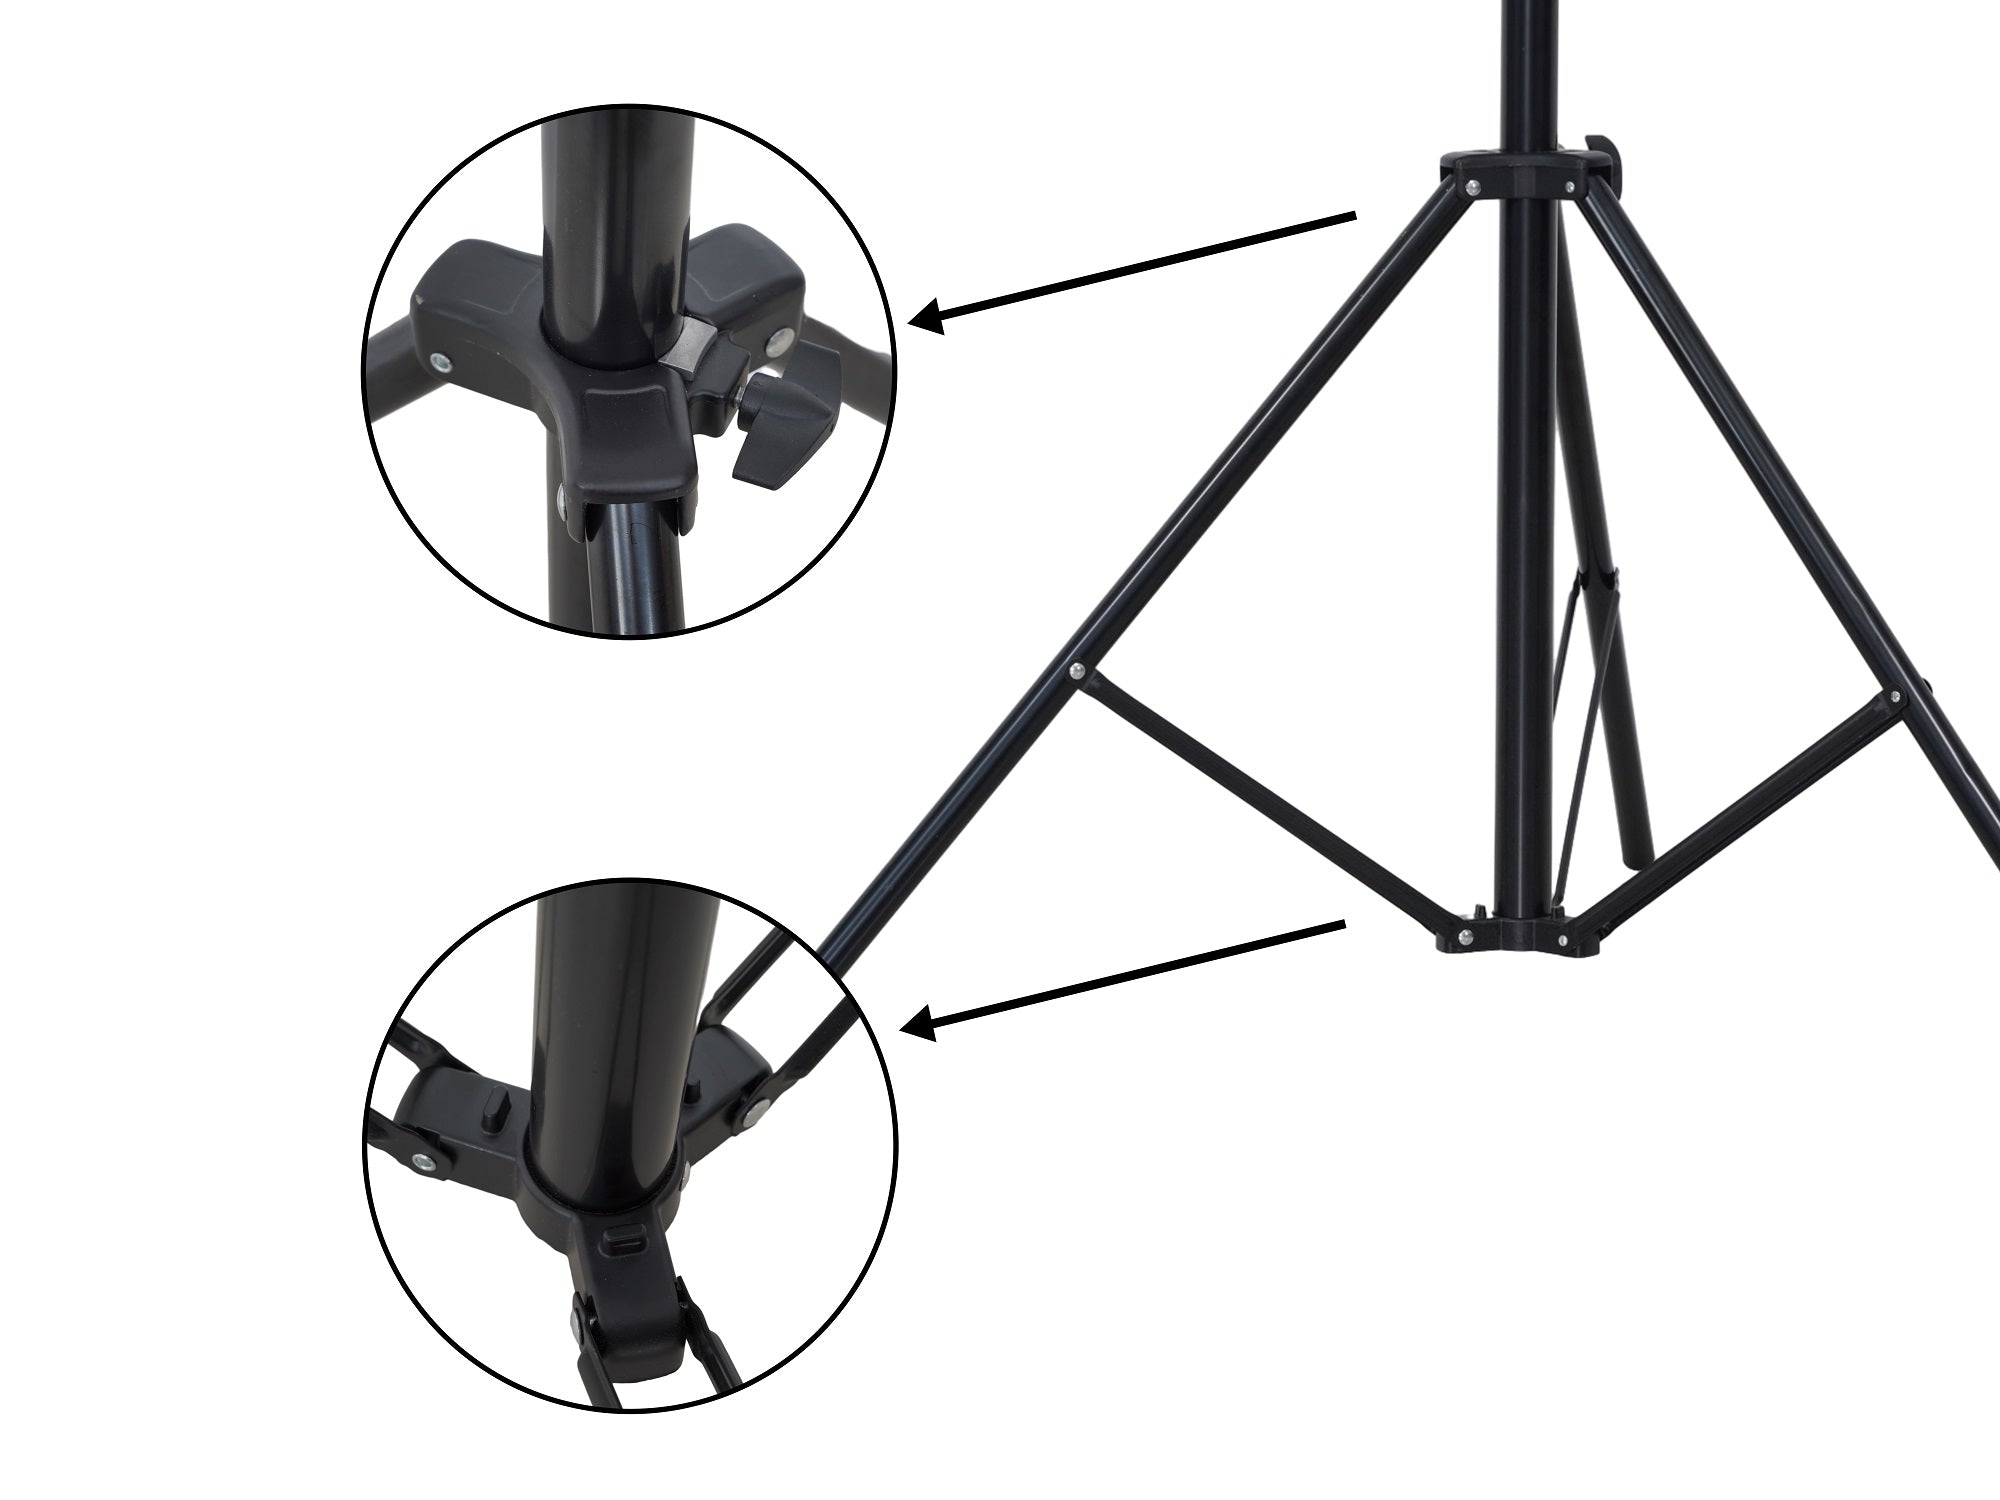 Kate 3 Horizontal Crossbars Adjustable Background Stand for photography